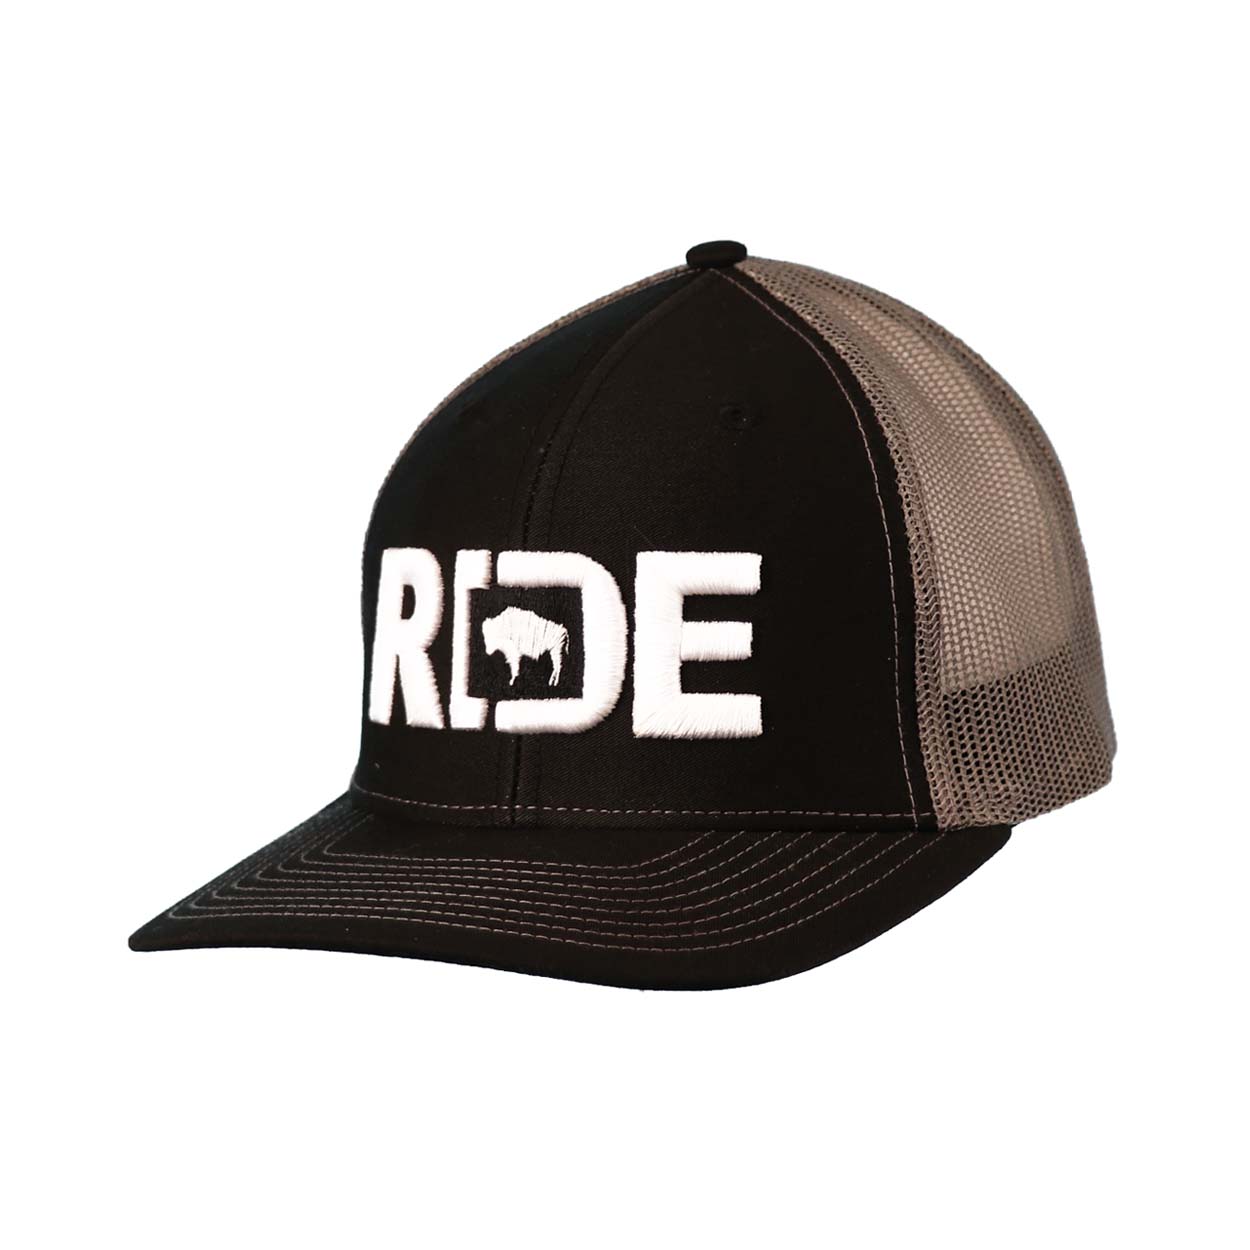 Ride Wyoming Classic Embroidered Snapback Trucker Hat Black/Gray